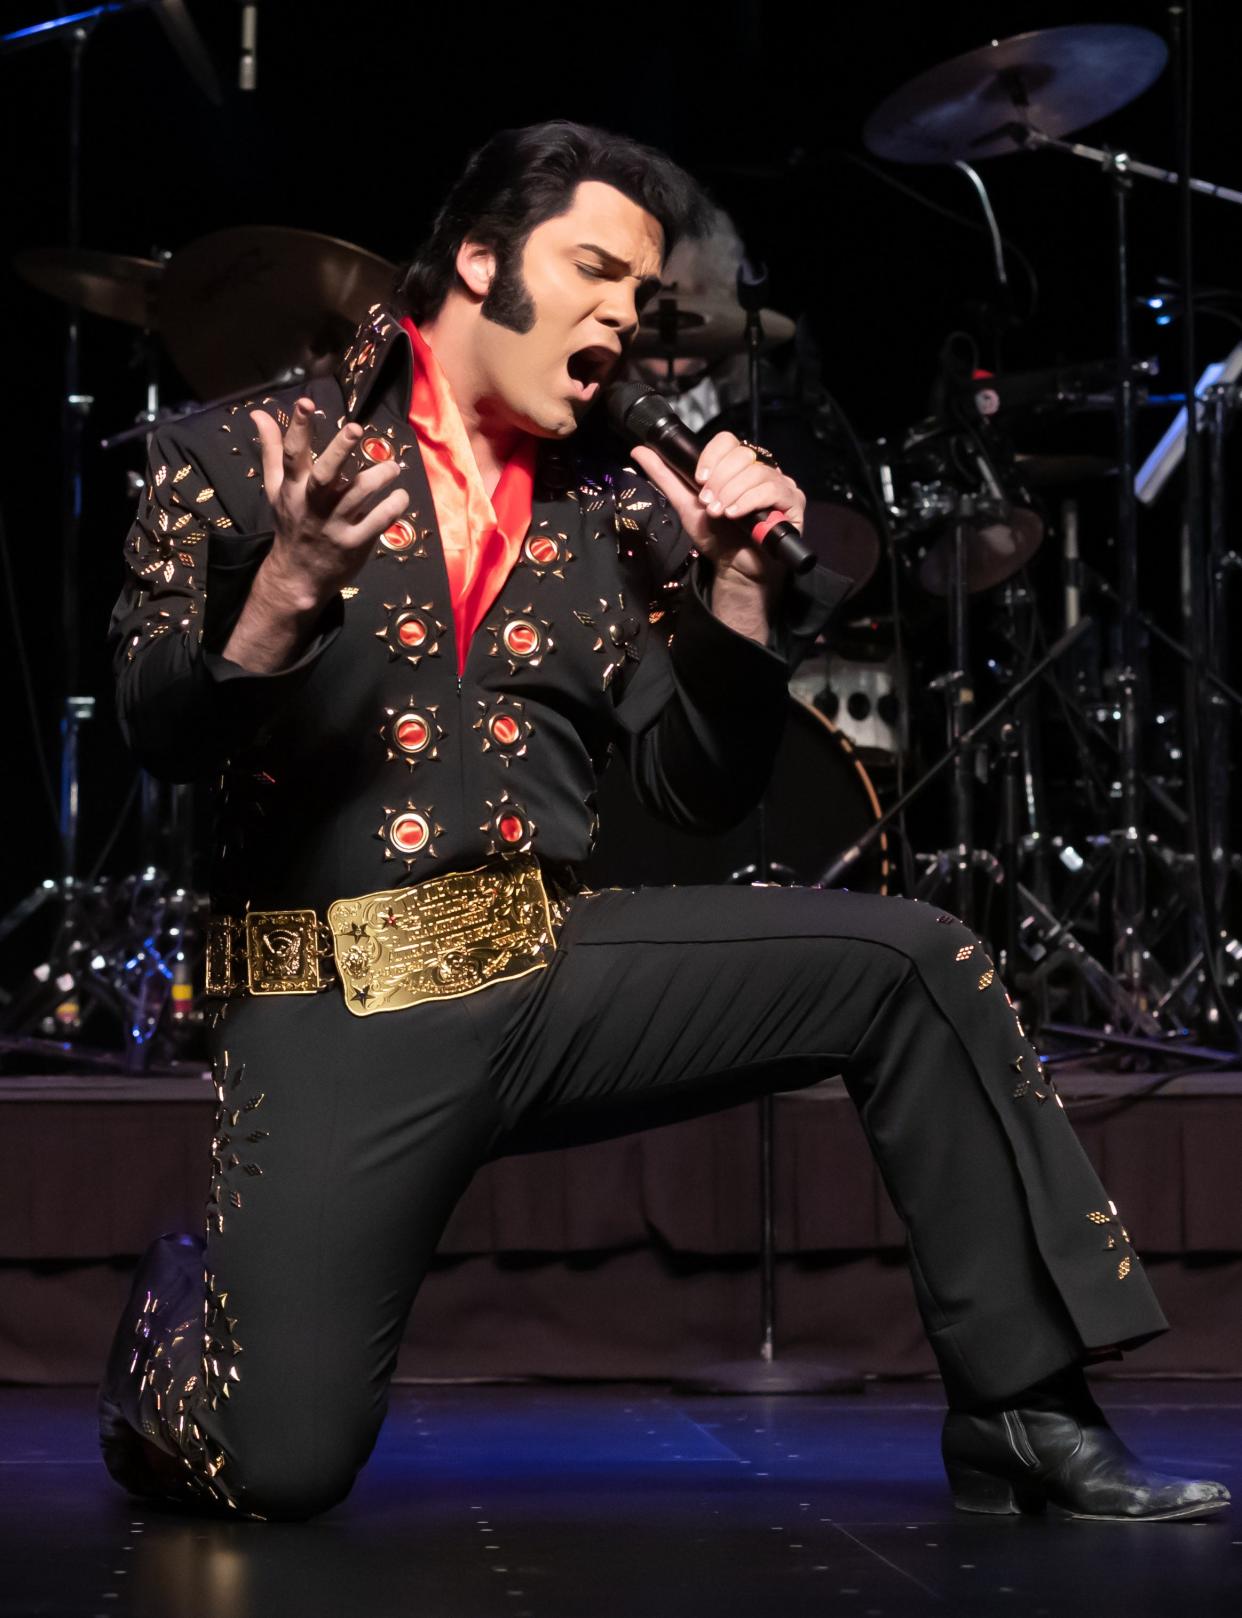 Worcester Elvis Presley tribute artist Dan Fontaine is set to perform at the BrickBox Theater at the Jean McDonough Arts Center.